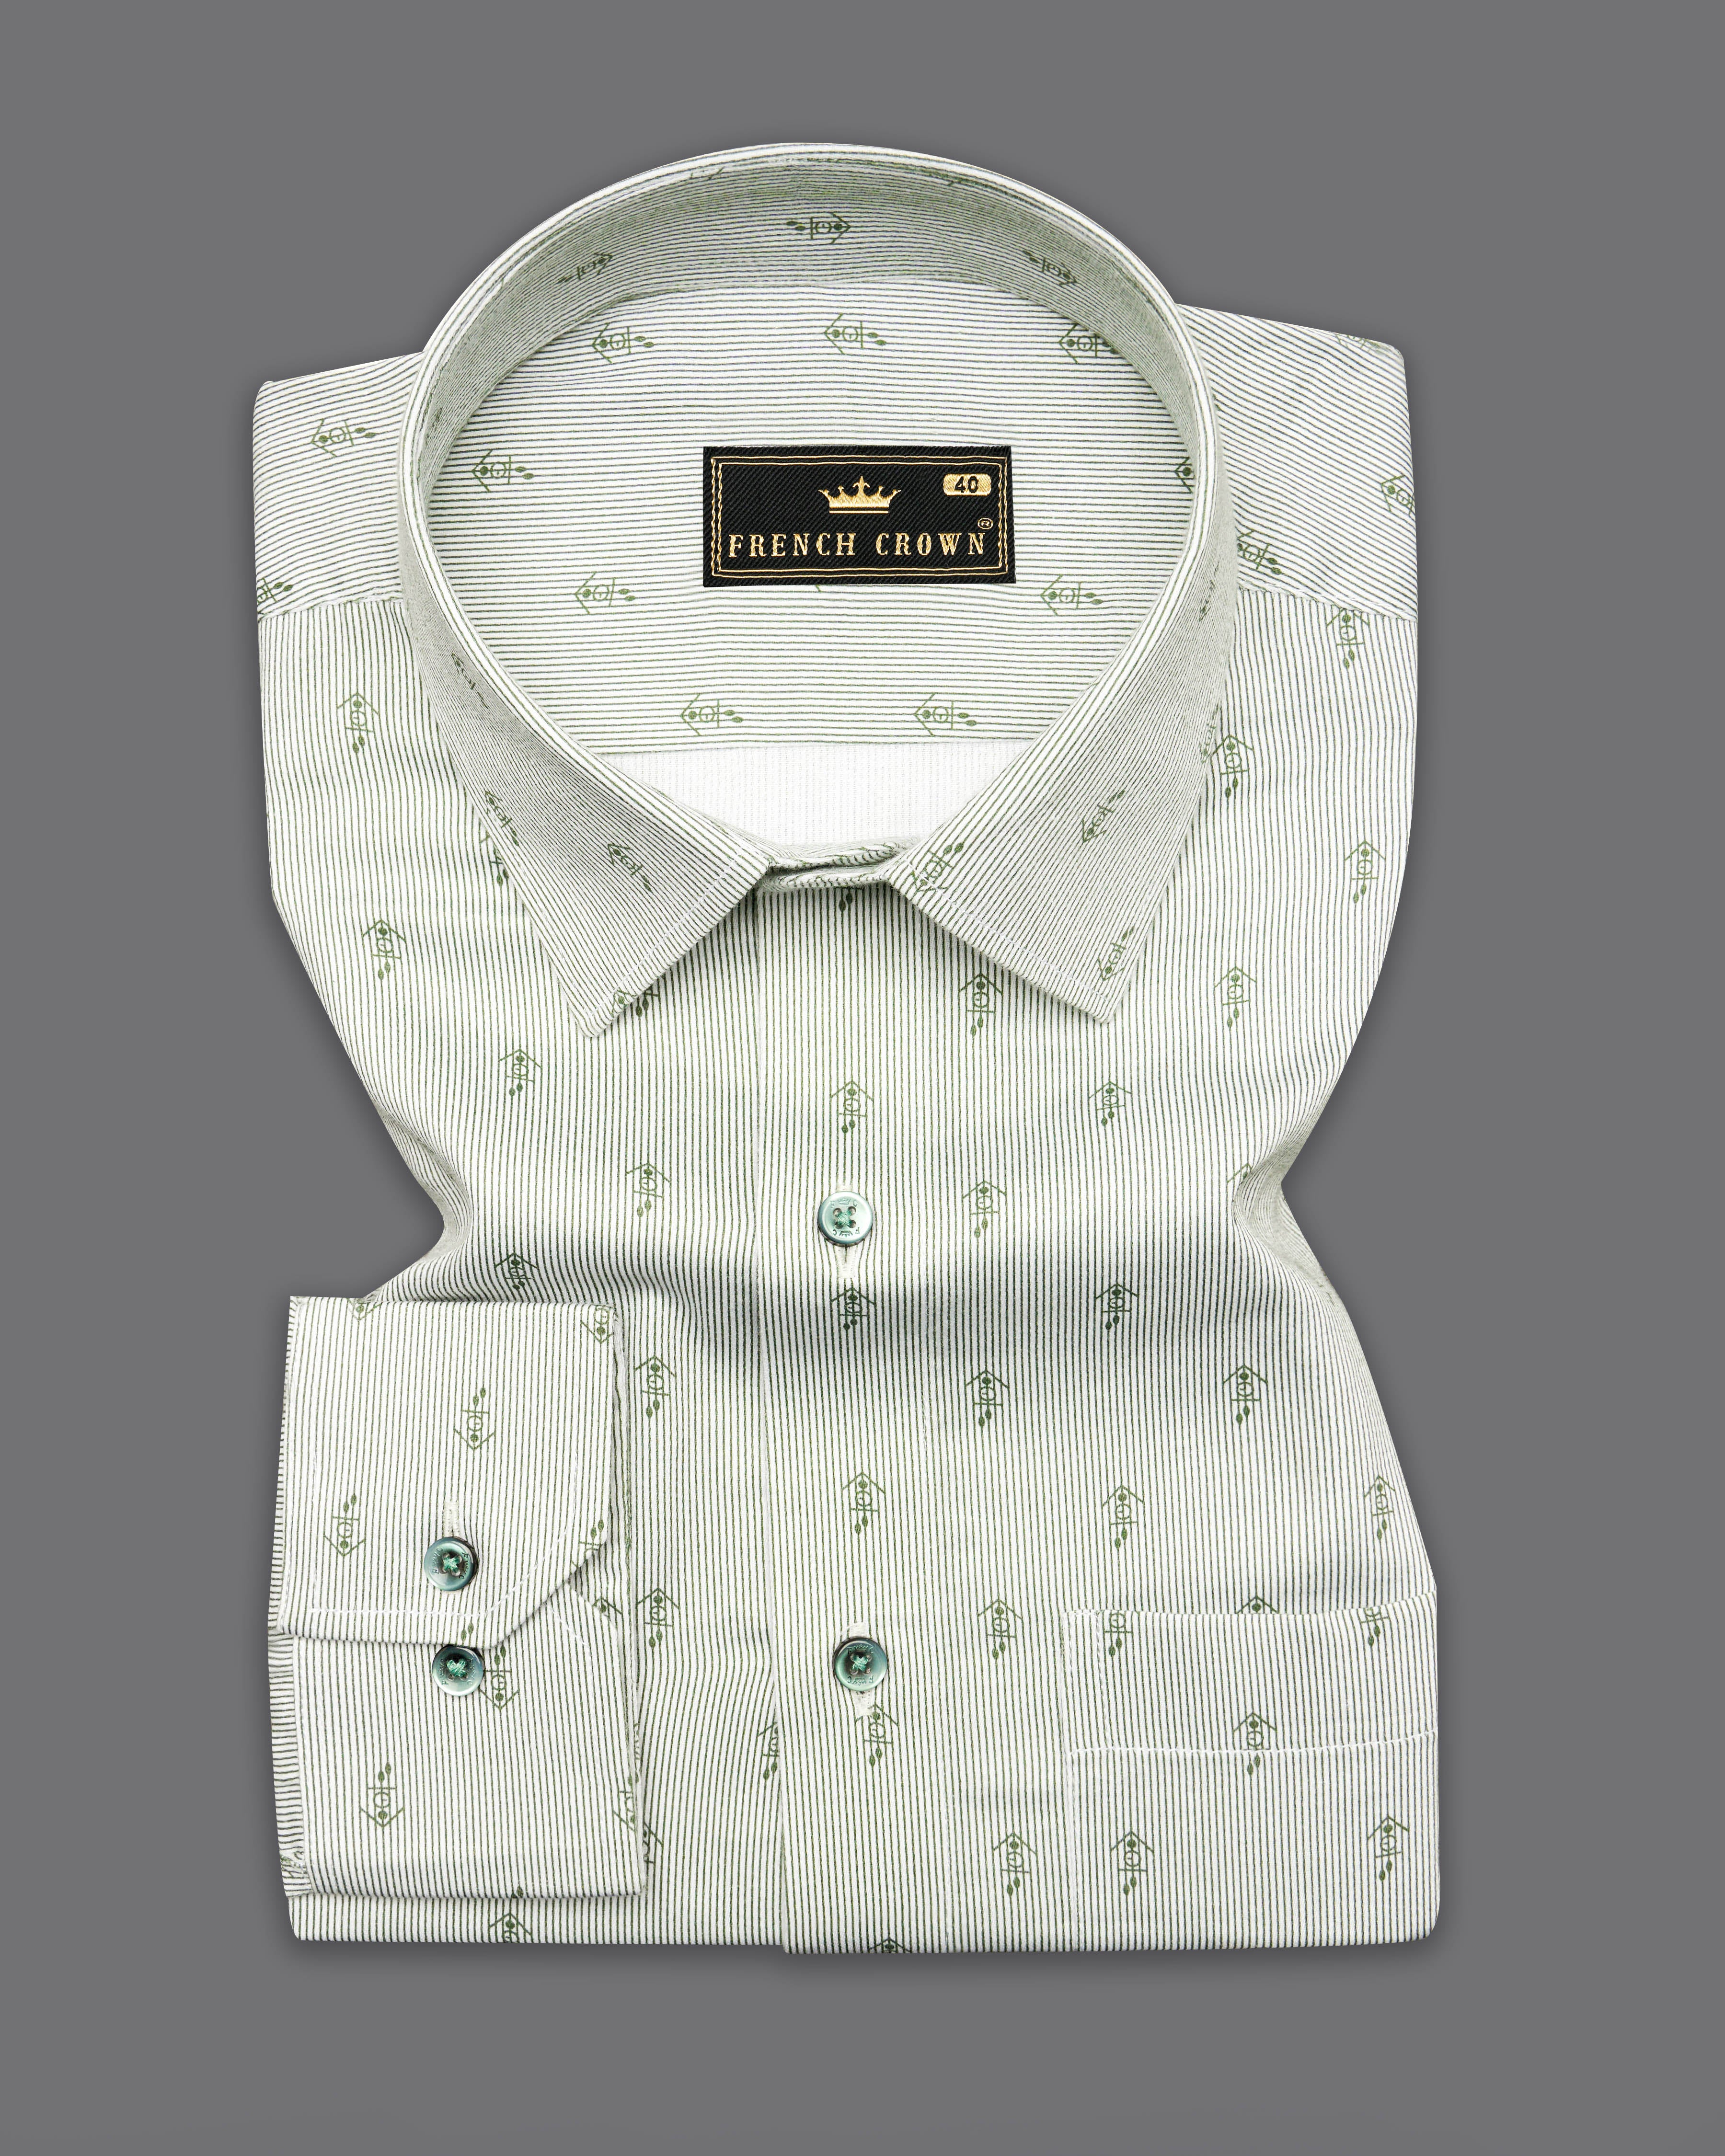 Catskill White with Hemlock Green Pinstriped with Animated Printed Premium Cotton Designer Shirt 7672-GR-RPRT-002-38, 7672-GR-RPRT-002-H-38, 7672-GR-RPRT-002-39, 7672-GR-RPRT-002-H-39, 7672-GR-RPRT-002-40, 7672-GR-RPRT-002-H-40, 7672-GR-RPRT-002-42, 7672-GR-RPRT-002-H-42, 7672-GR-RPRT-002-44, 7672-GR-RPRT-002-H-44, 7672-GR-RPRT-002-46, 7672-GR-RPRT-002-H-46, 7672-GR-RPRT-002-48, 7672-GR-RPRT-002-H-48, 7672-GR-RPRT-002-50, 7672-GR-RPRT-002-H-50, 7672-GR-RPRT-002-52, 7672-GR-RPRT-002-H-